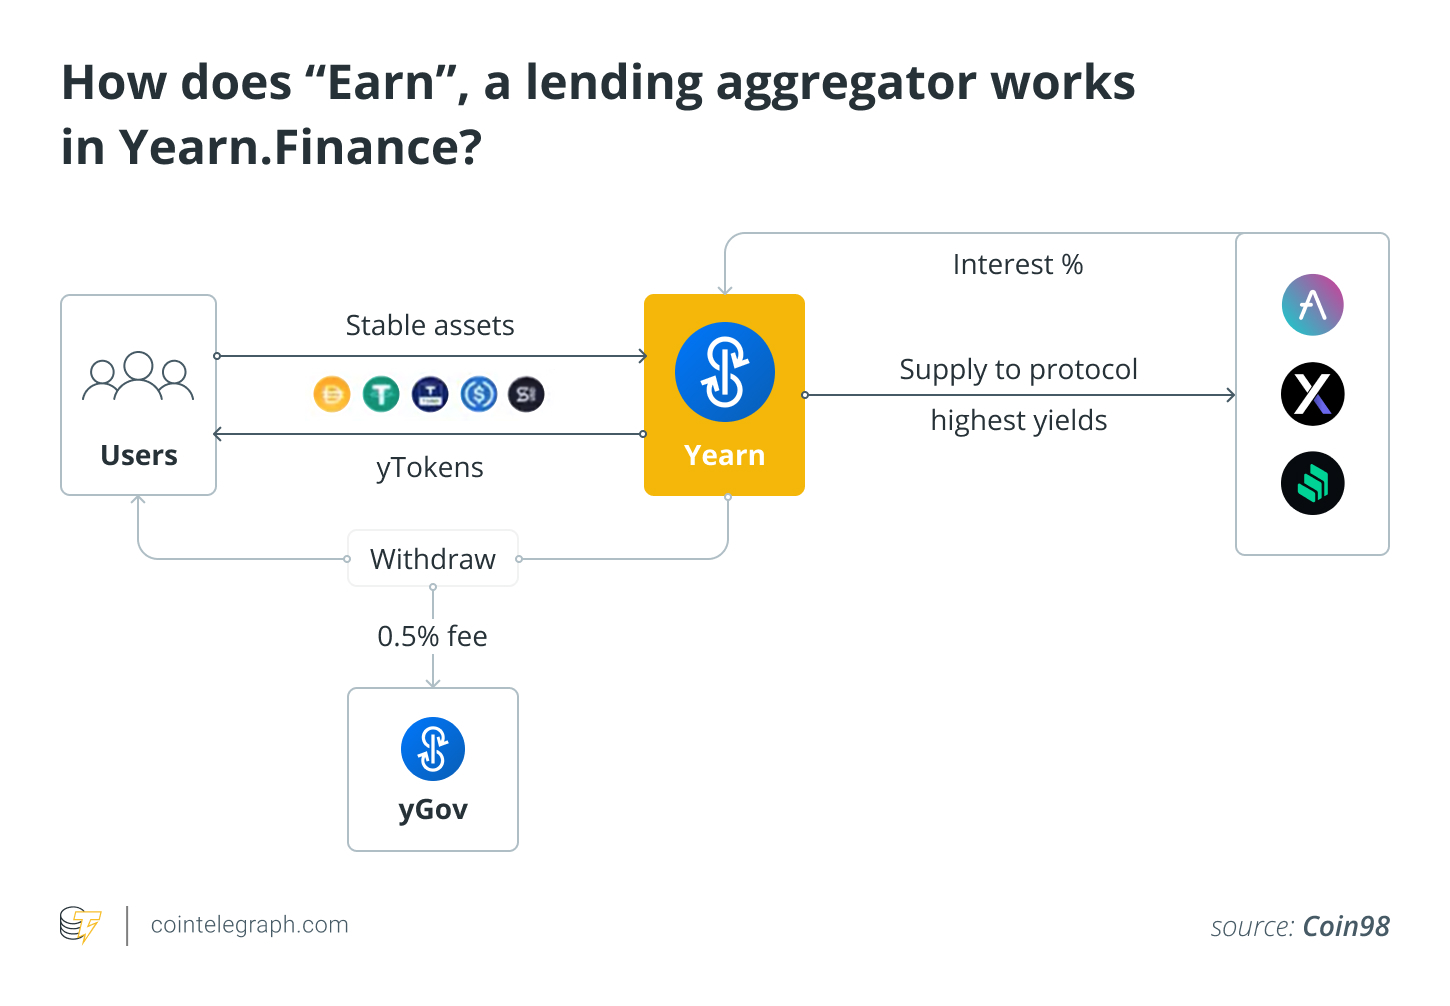 How does “Earn” a lending aggregator works in Yearn.Finance